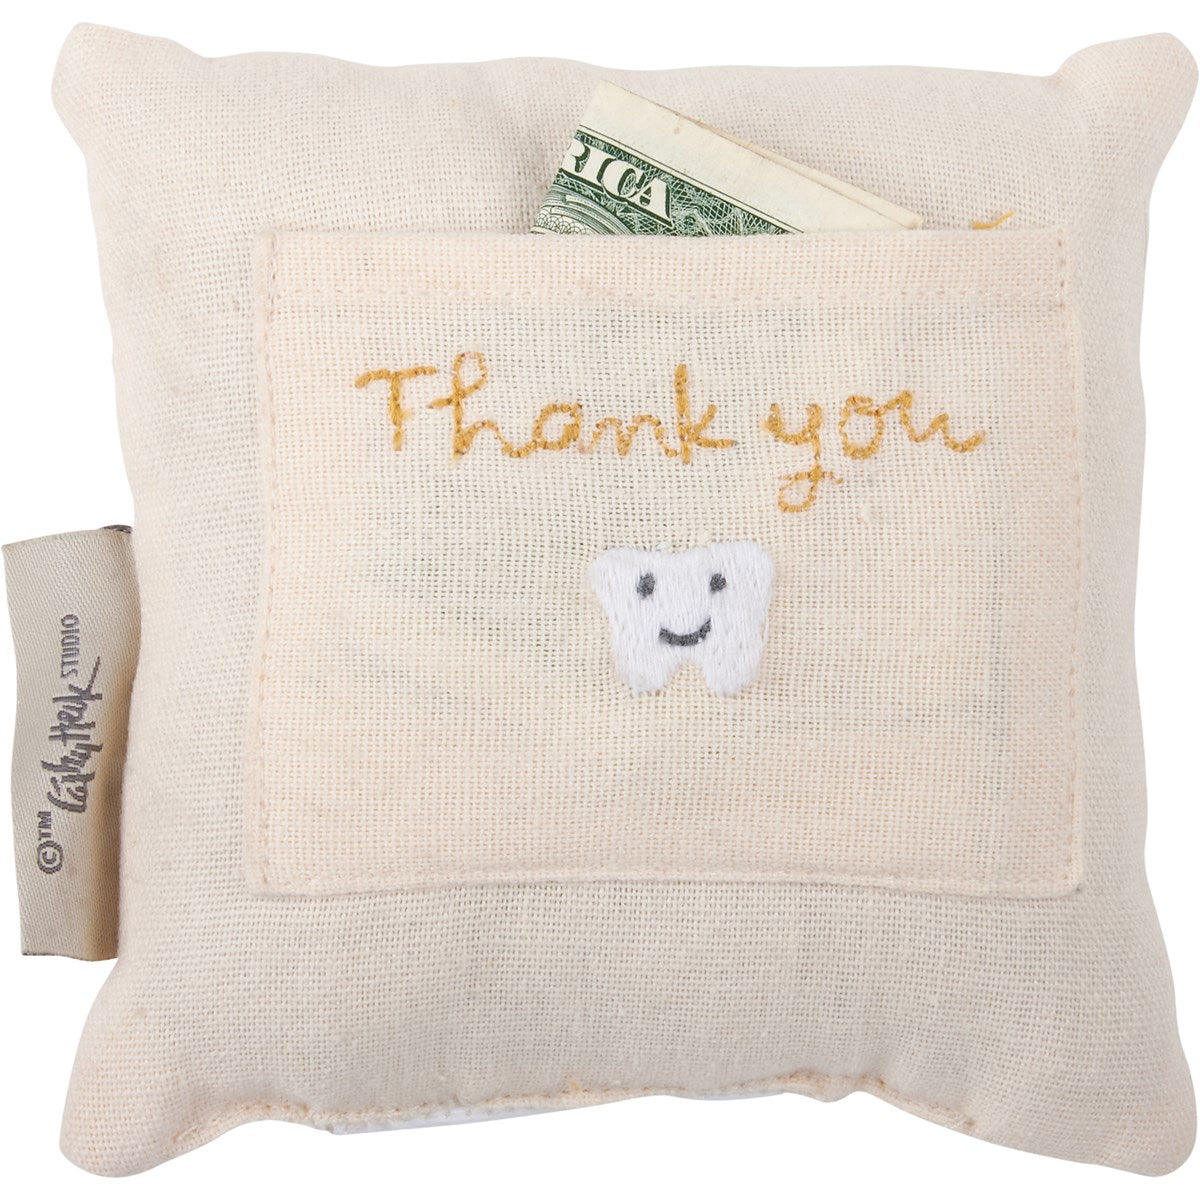 Tooth Fairy Pillow - Bee